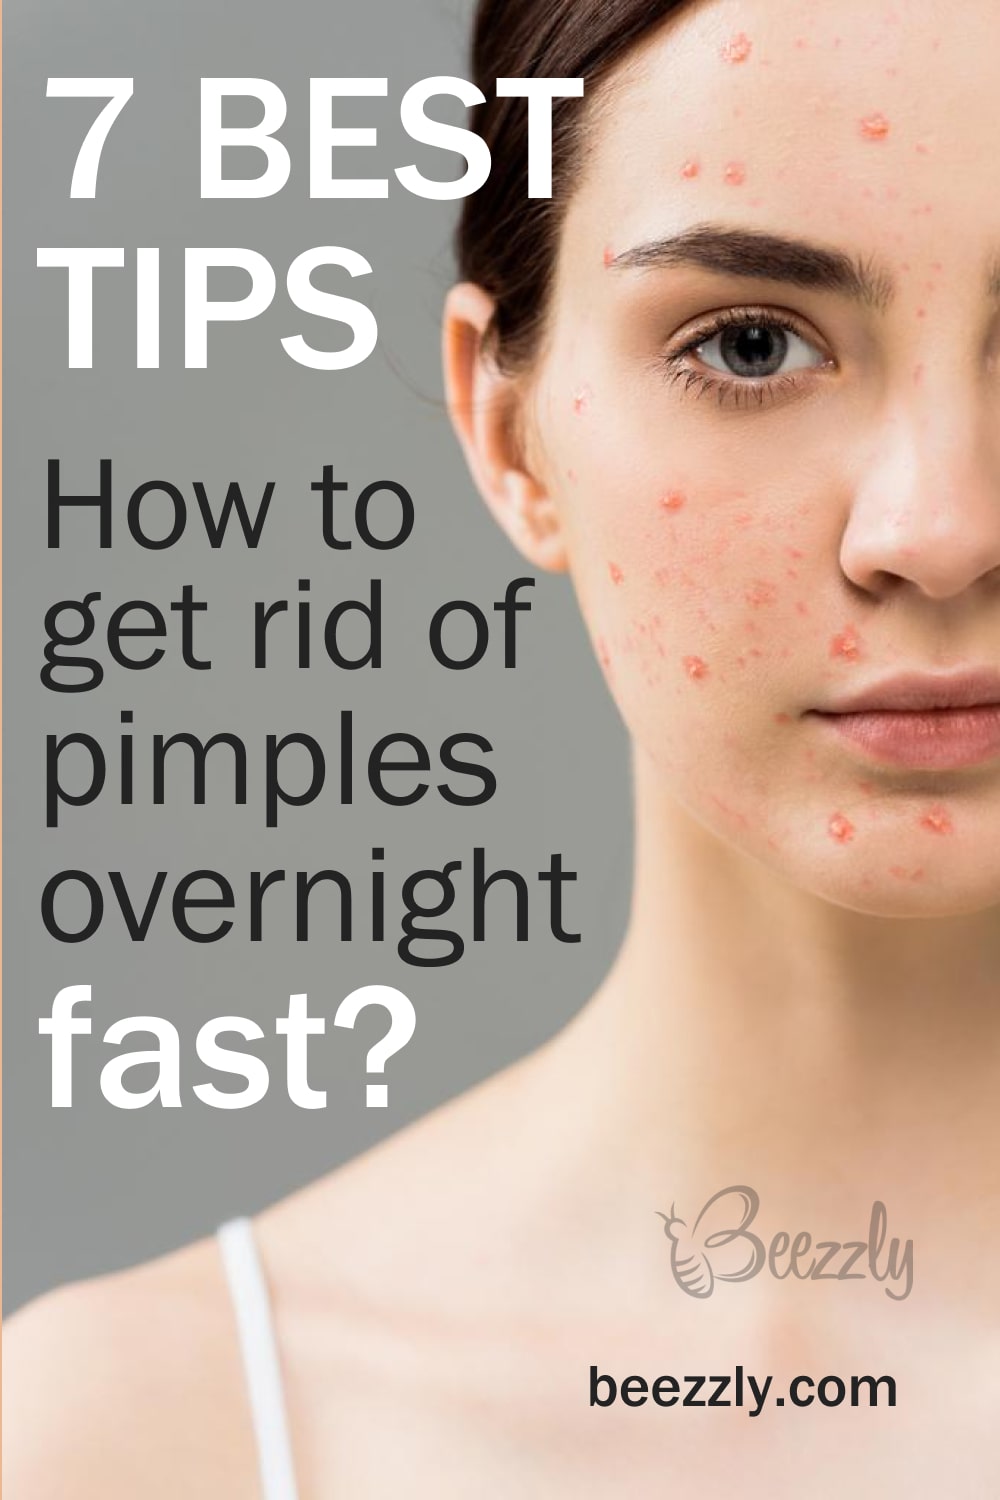 How to Get Rid of Pimples Overnight Fast